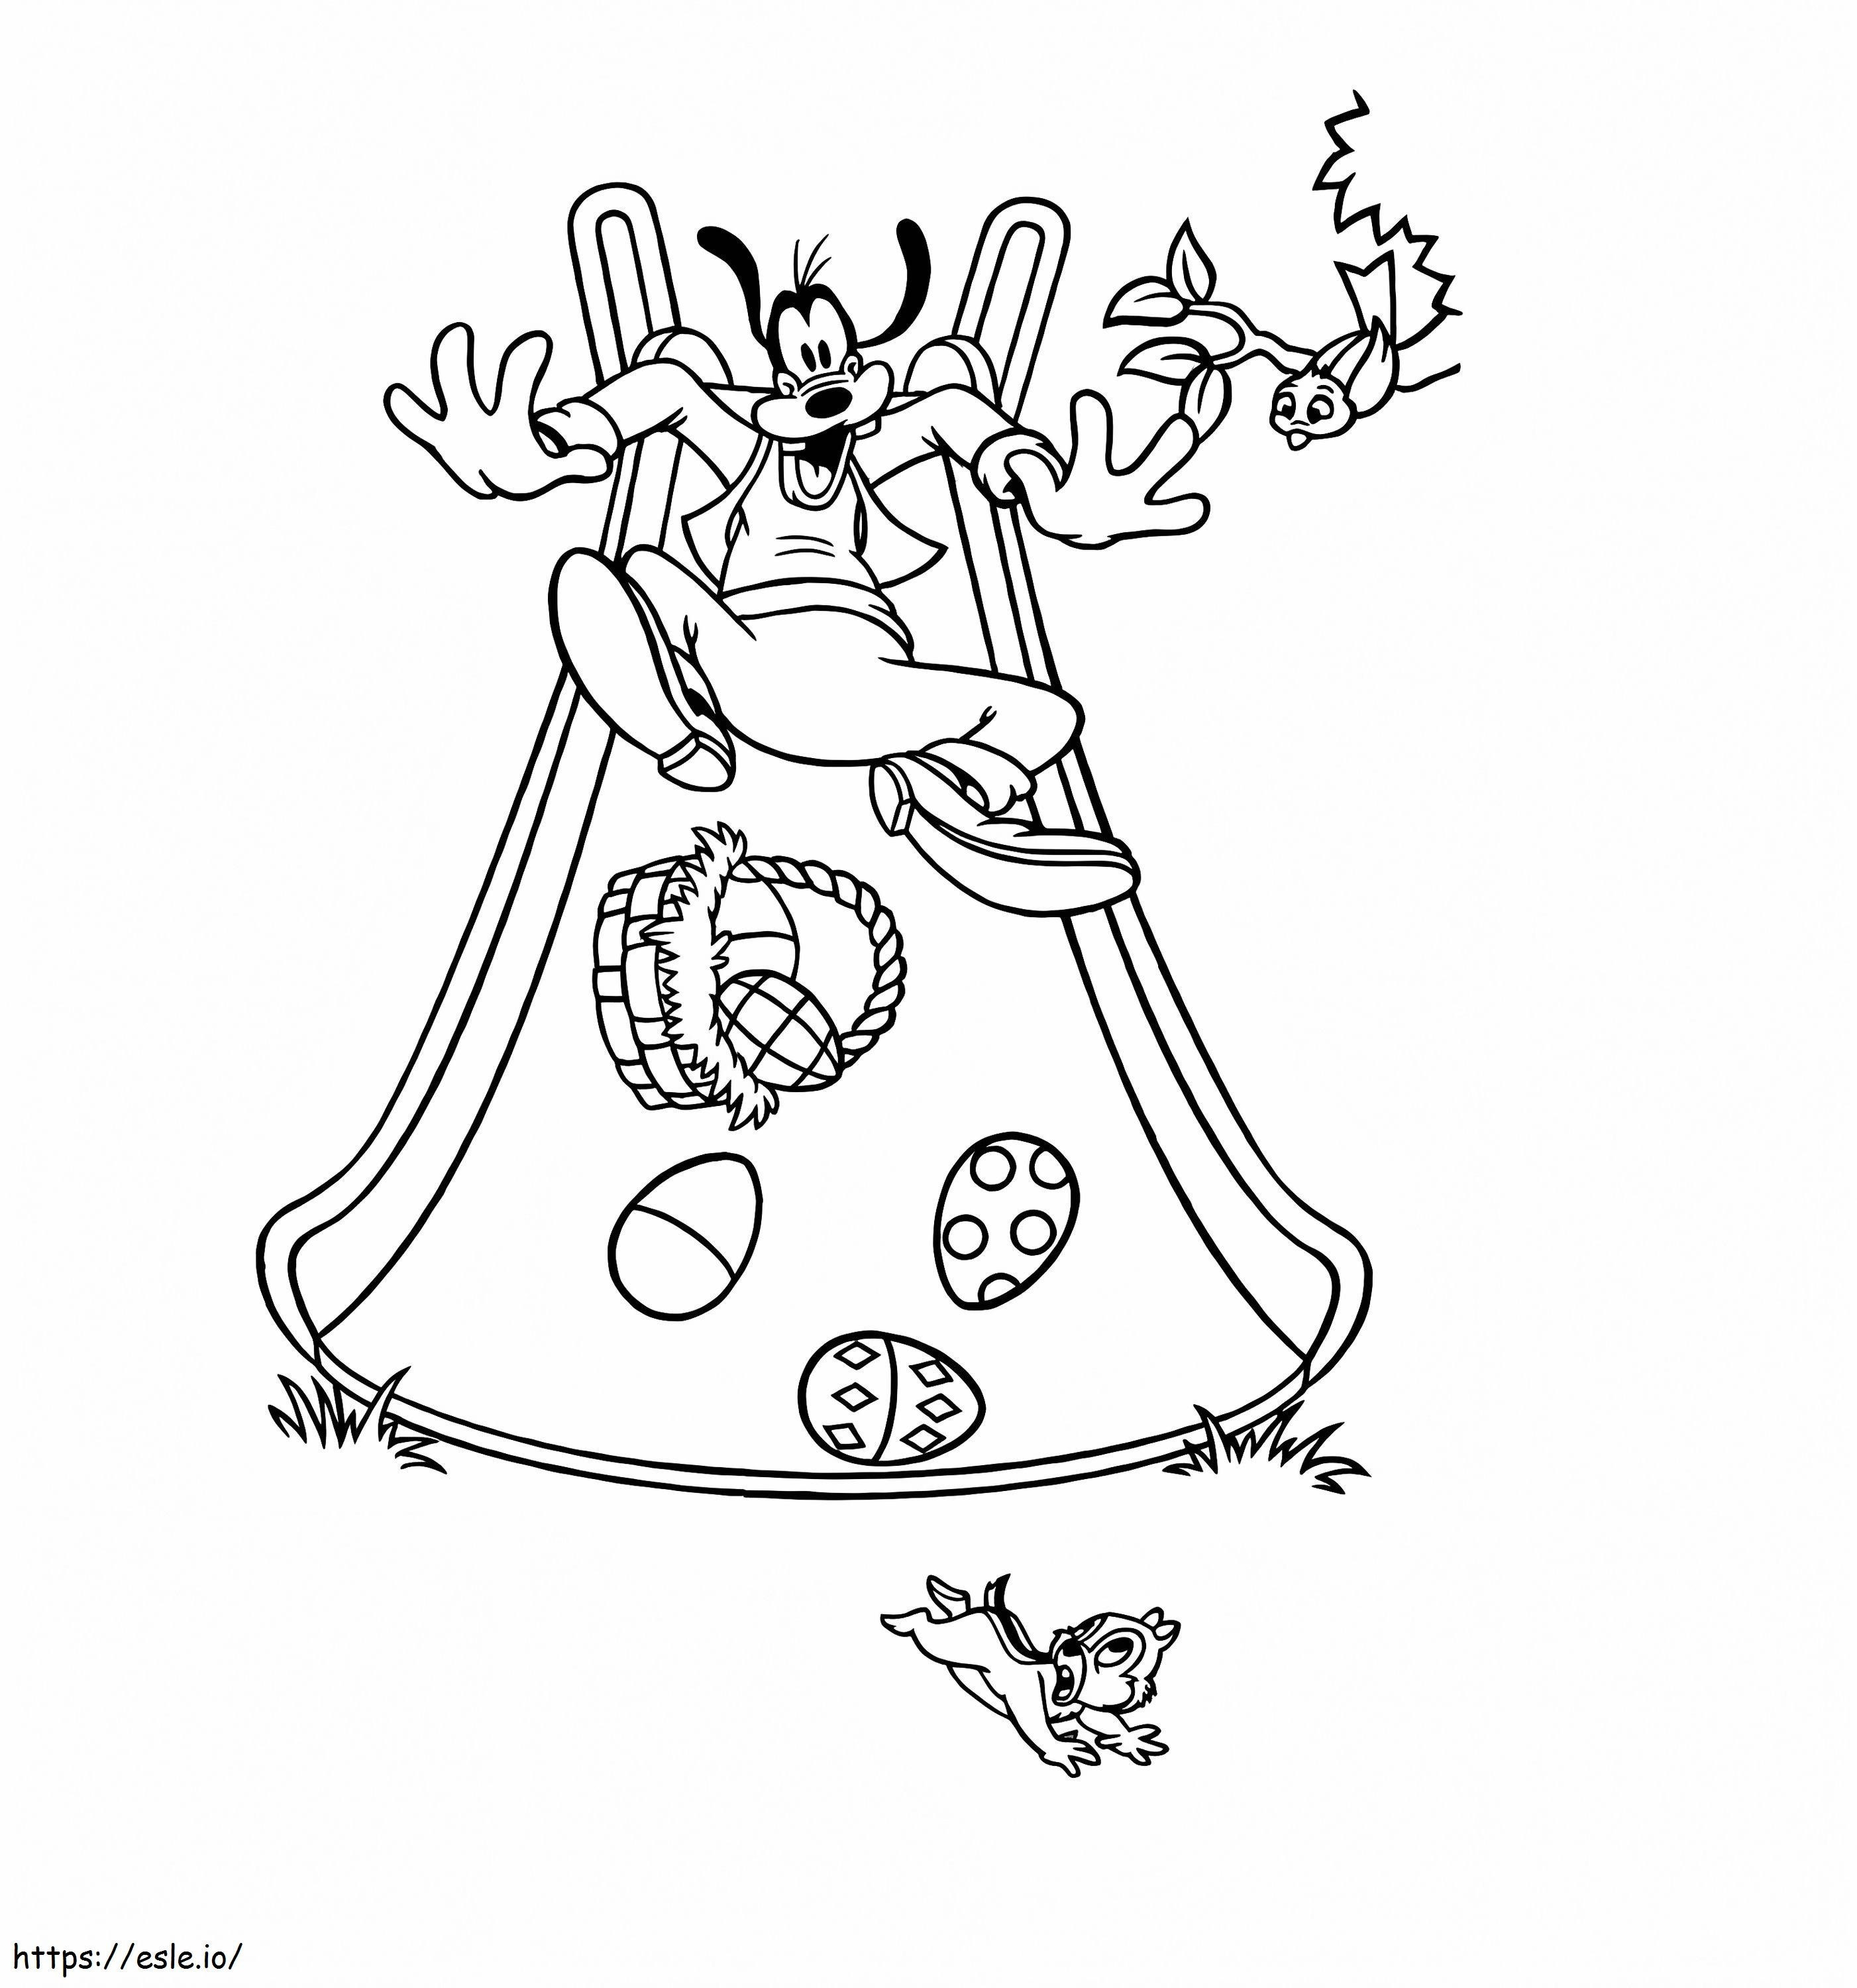 Goofy With Easter Basket coloring page